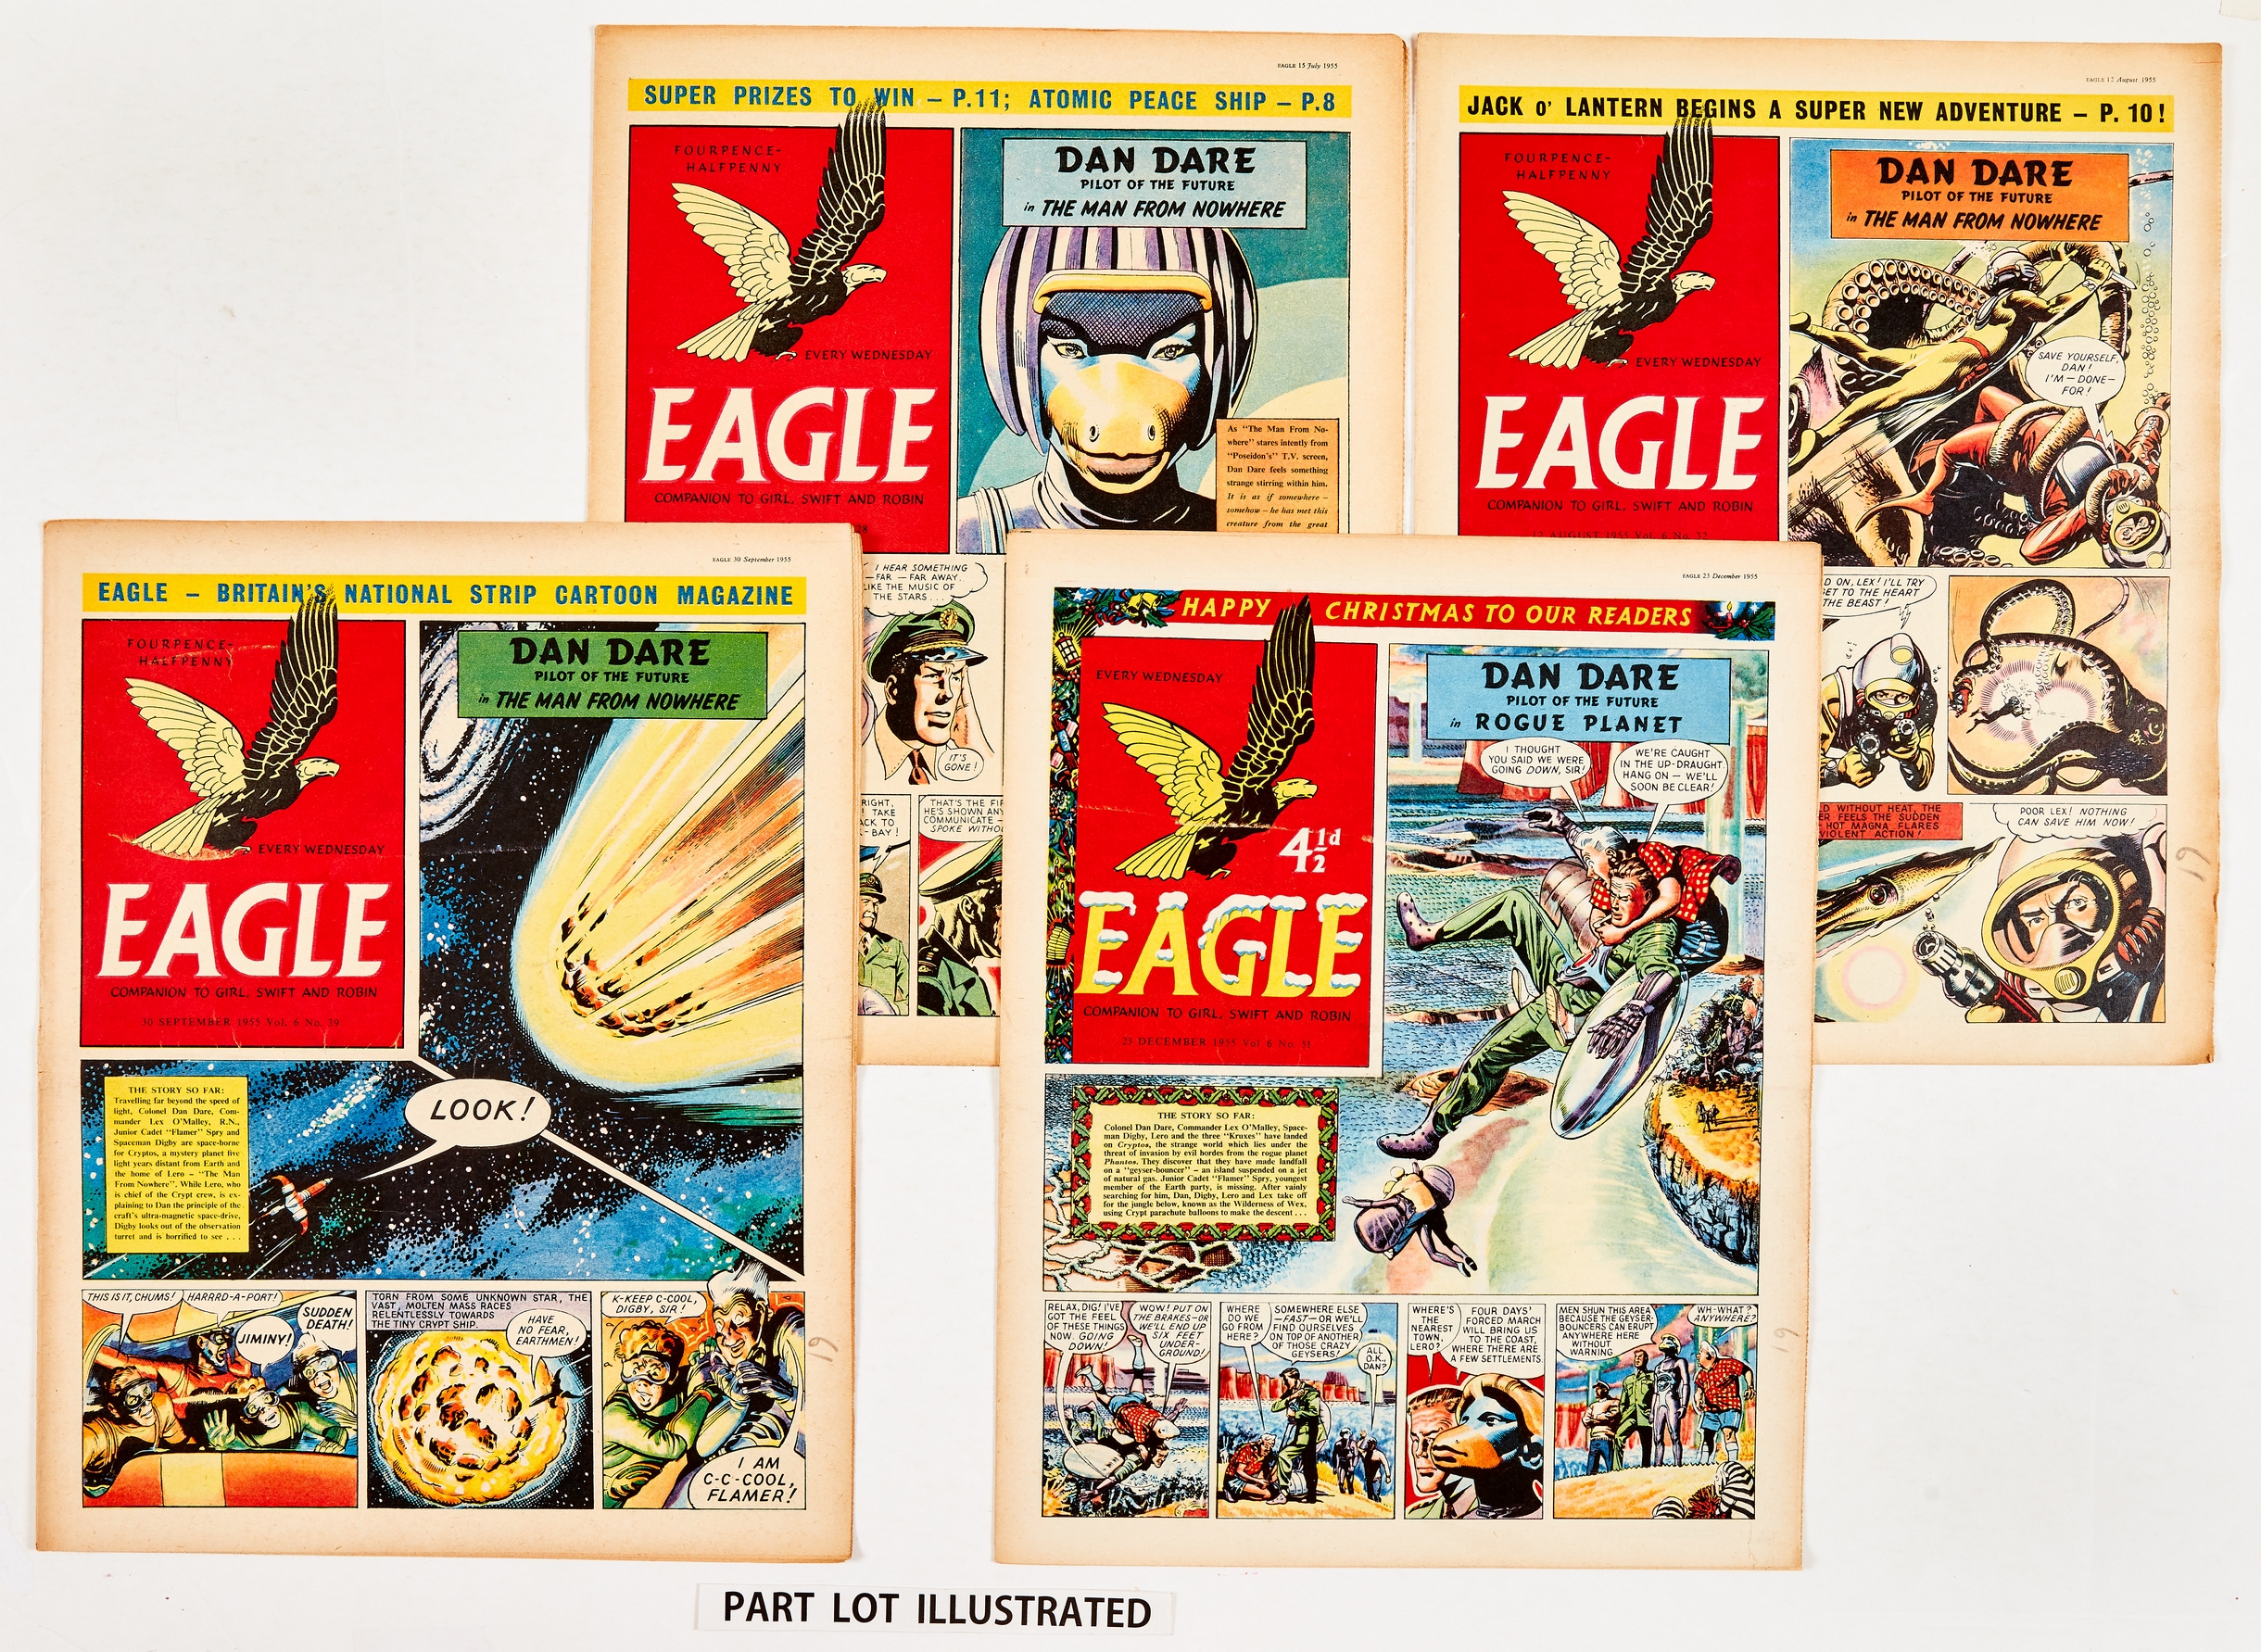 Eagle Vol. 6 (1955) 1-52. Complete year. Starring Dan Dare in Prisoners of Space and The Man from